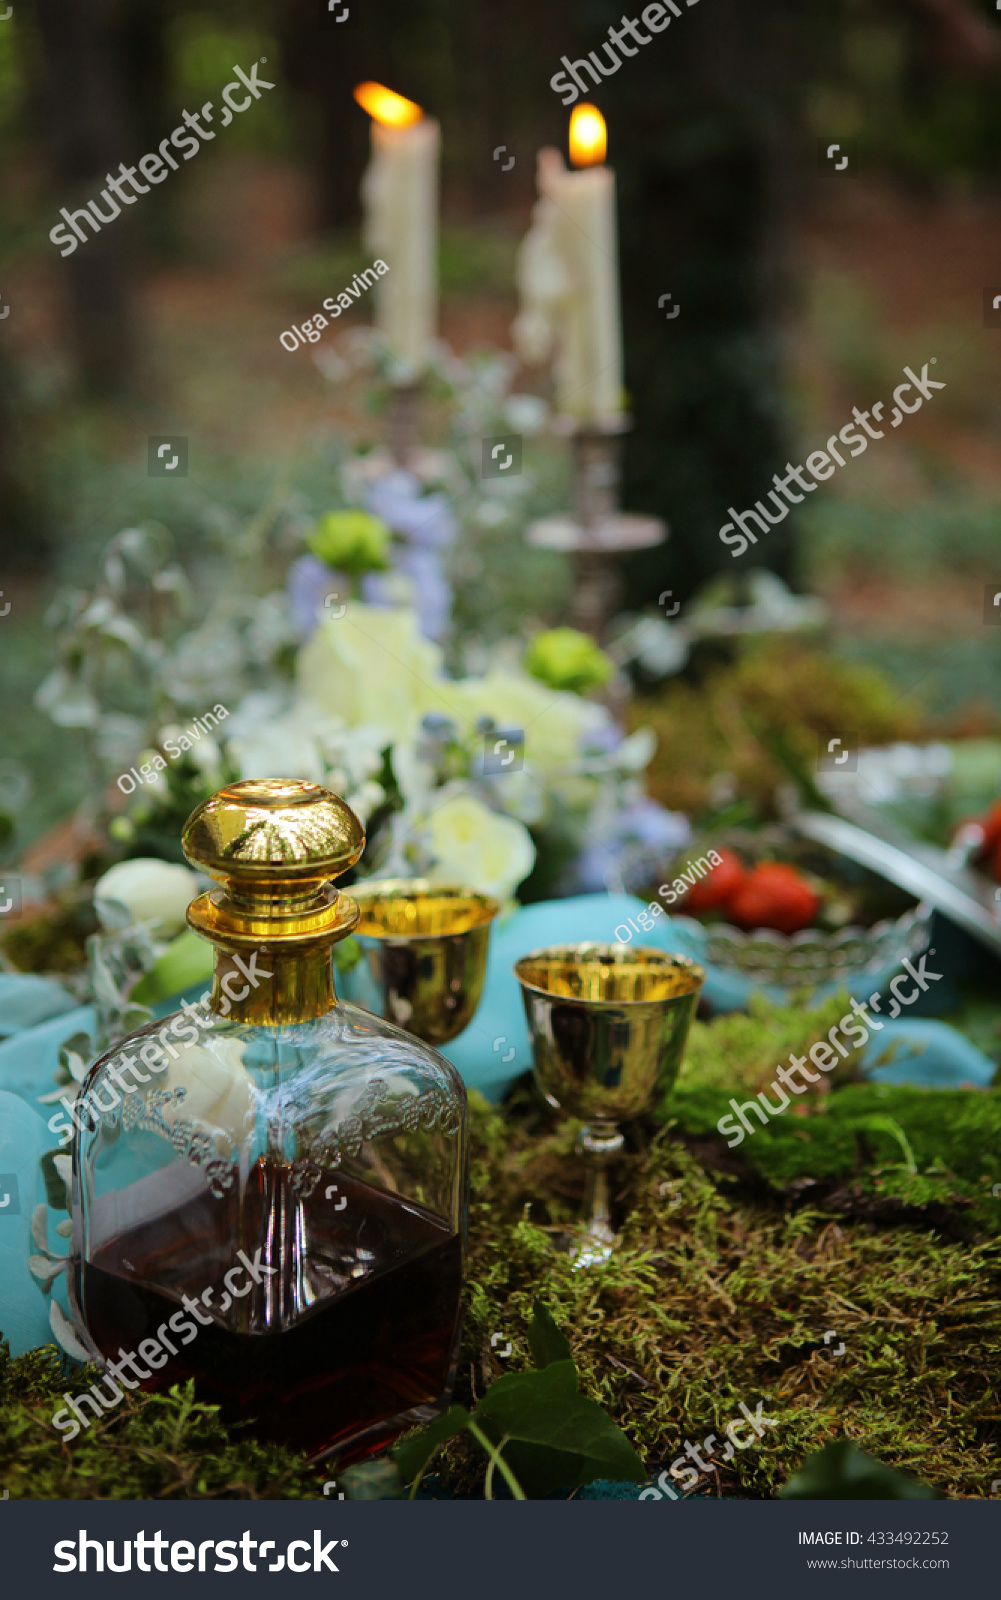 Enchanted Forest Theme Wedding Decoration Plate Stock Photo Edit Now 433492252